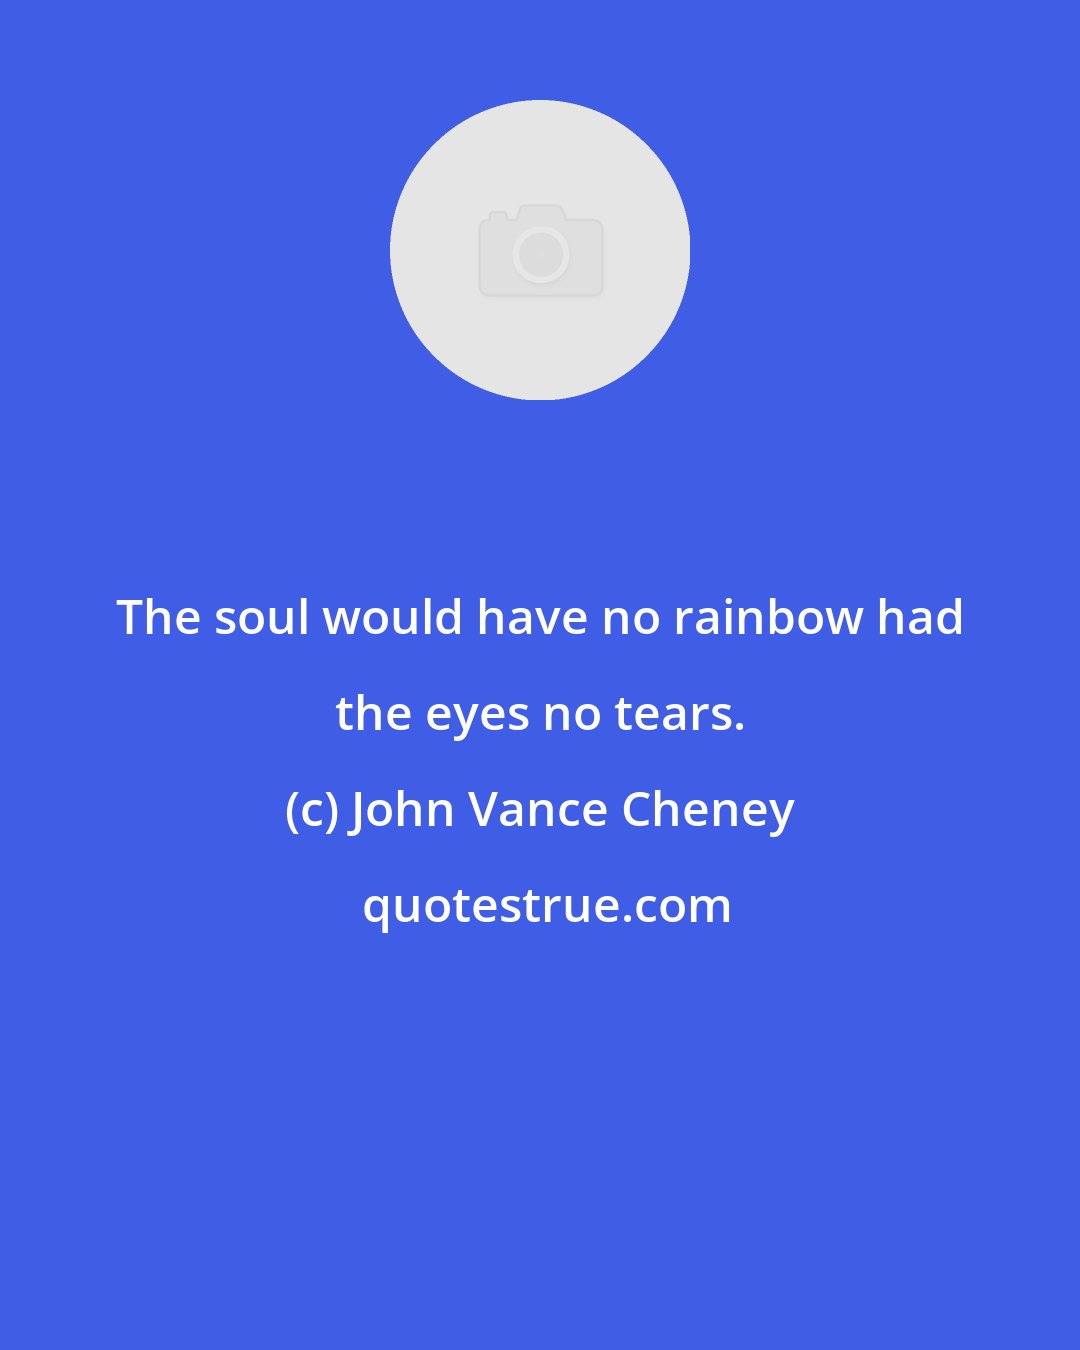 John Vance Cheney: The soul would have no rainbow had the eyes no tears.